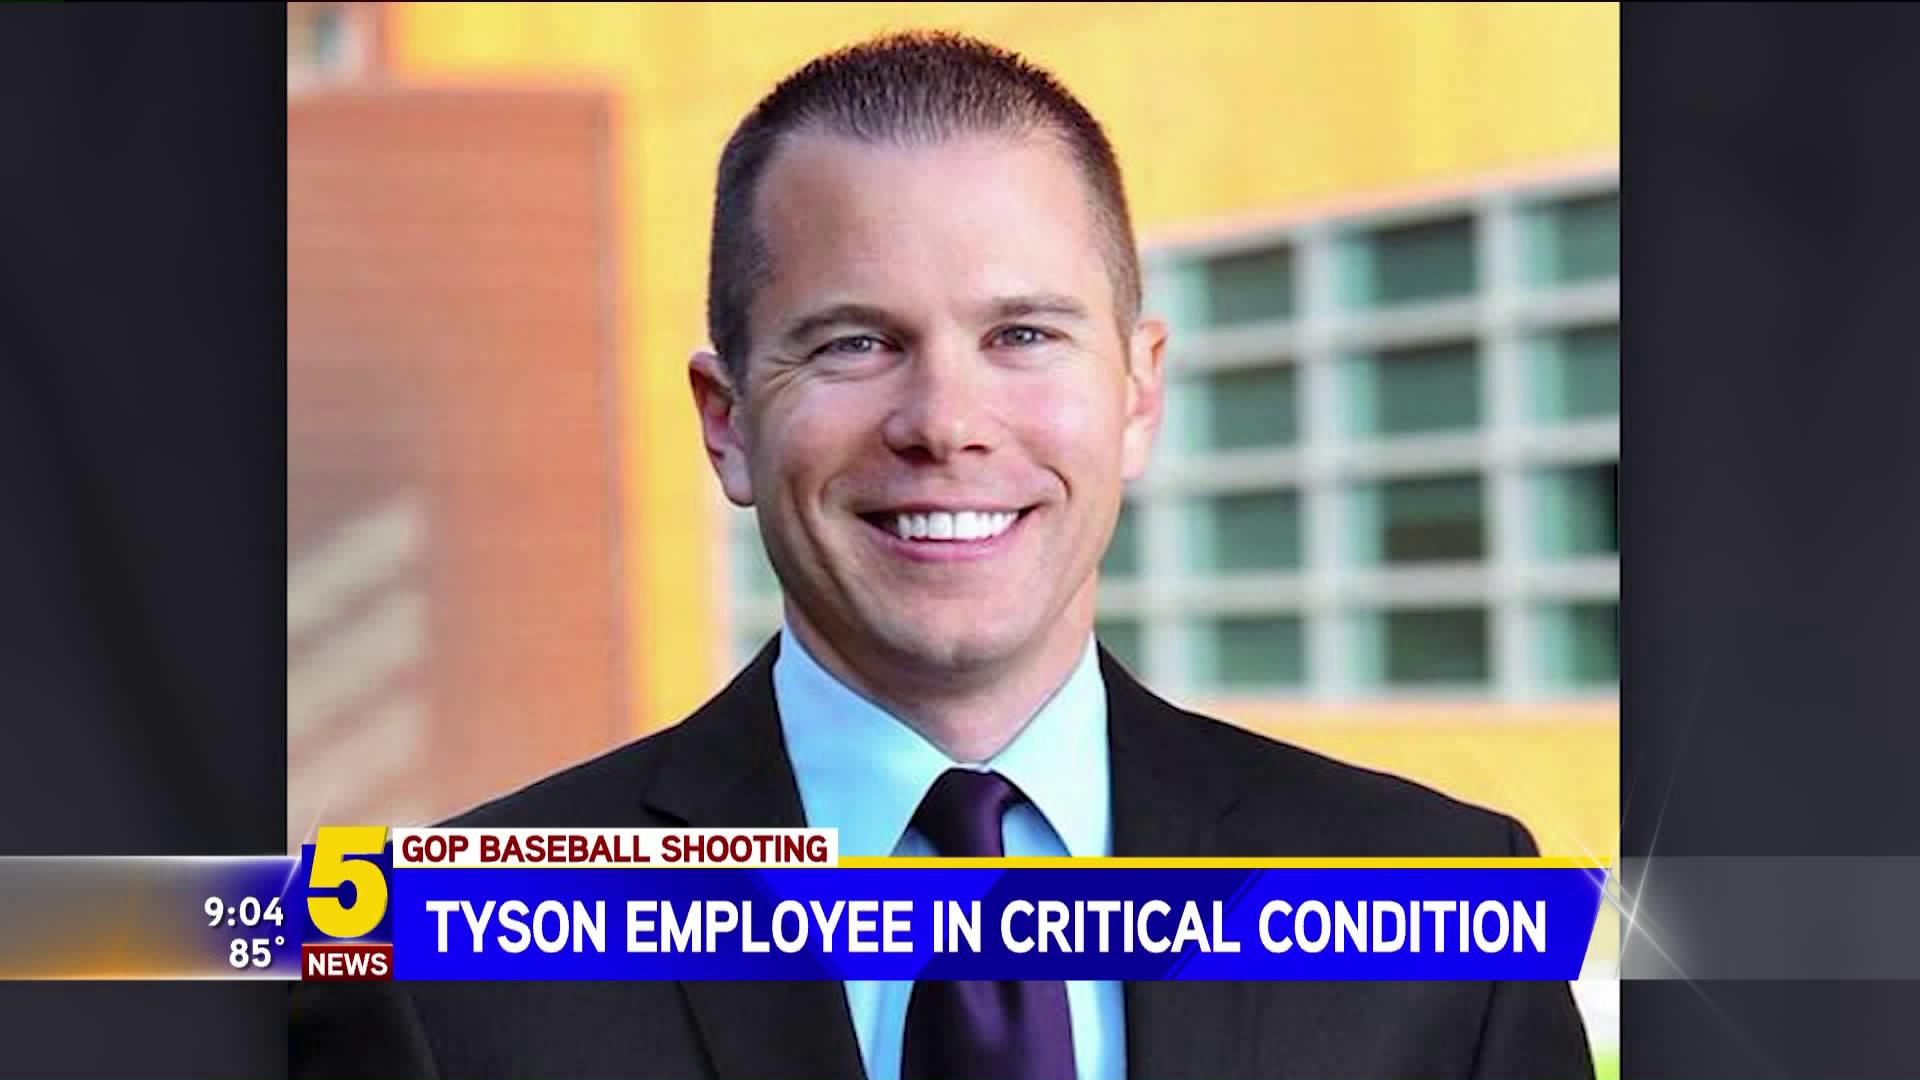 Tyson Employee In Critical Condition